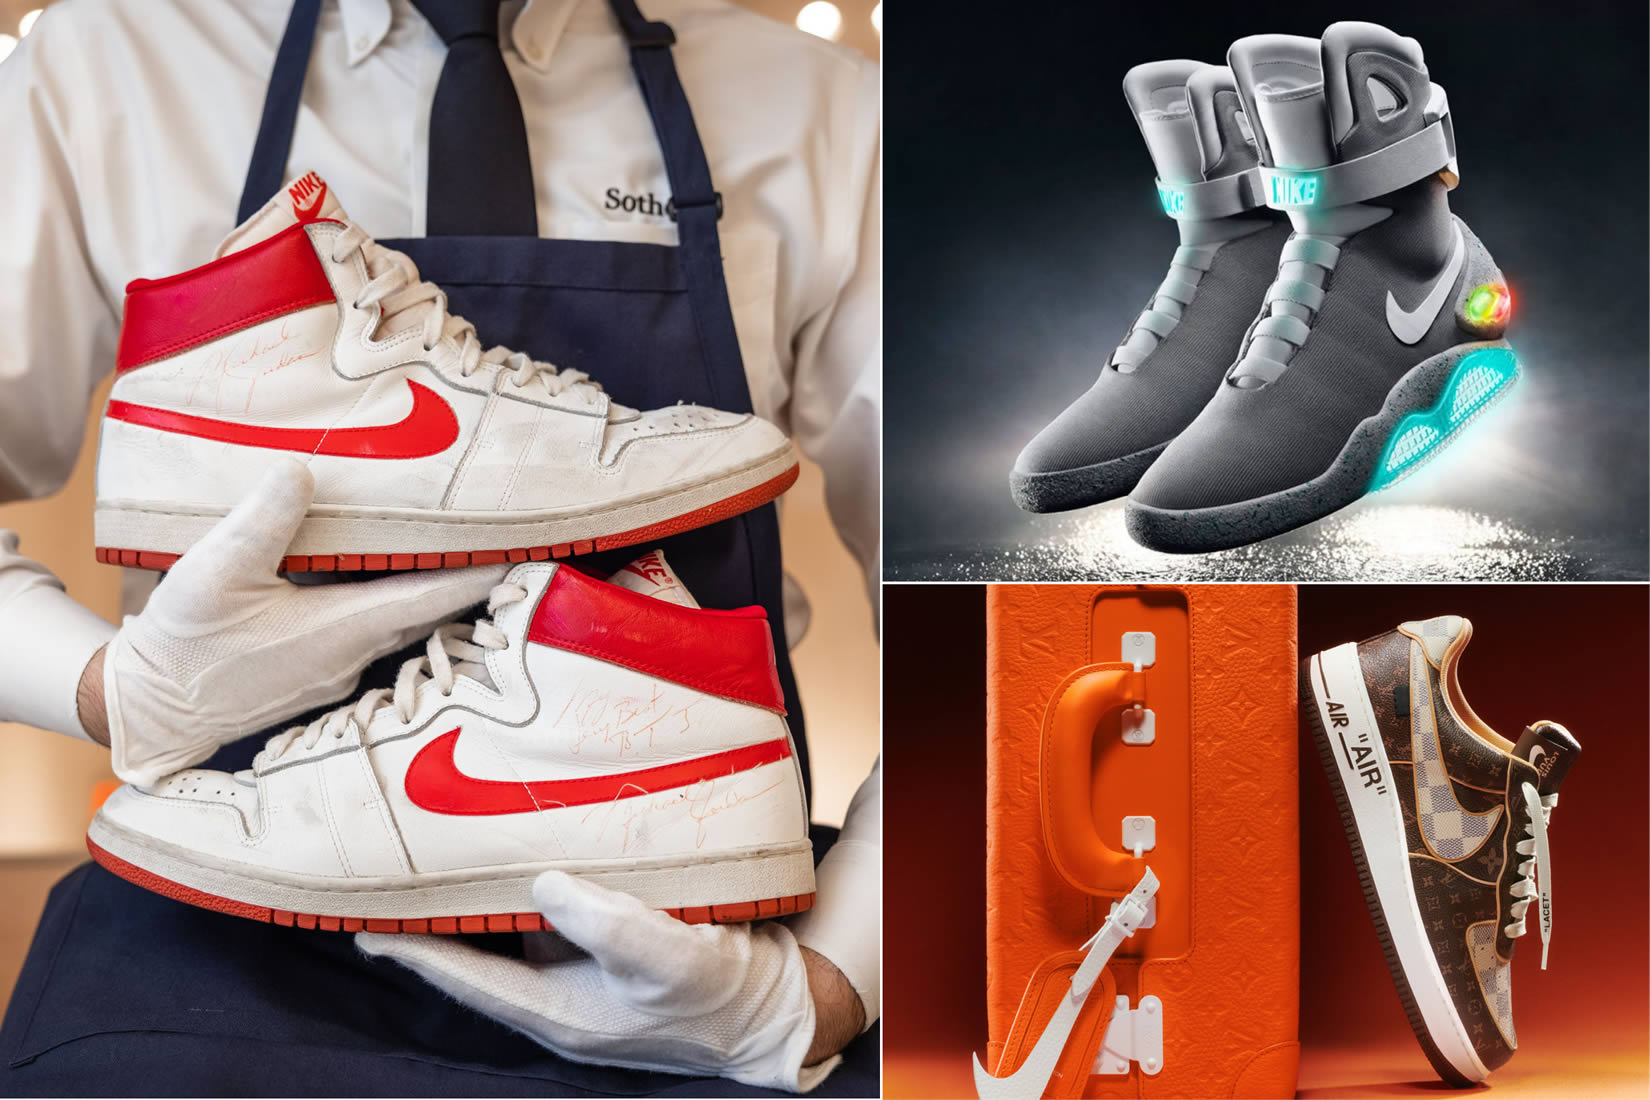 25 Most Expensive Sneakers Ever Sold: Game-Worn Jordans to Air